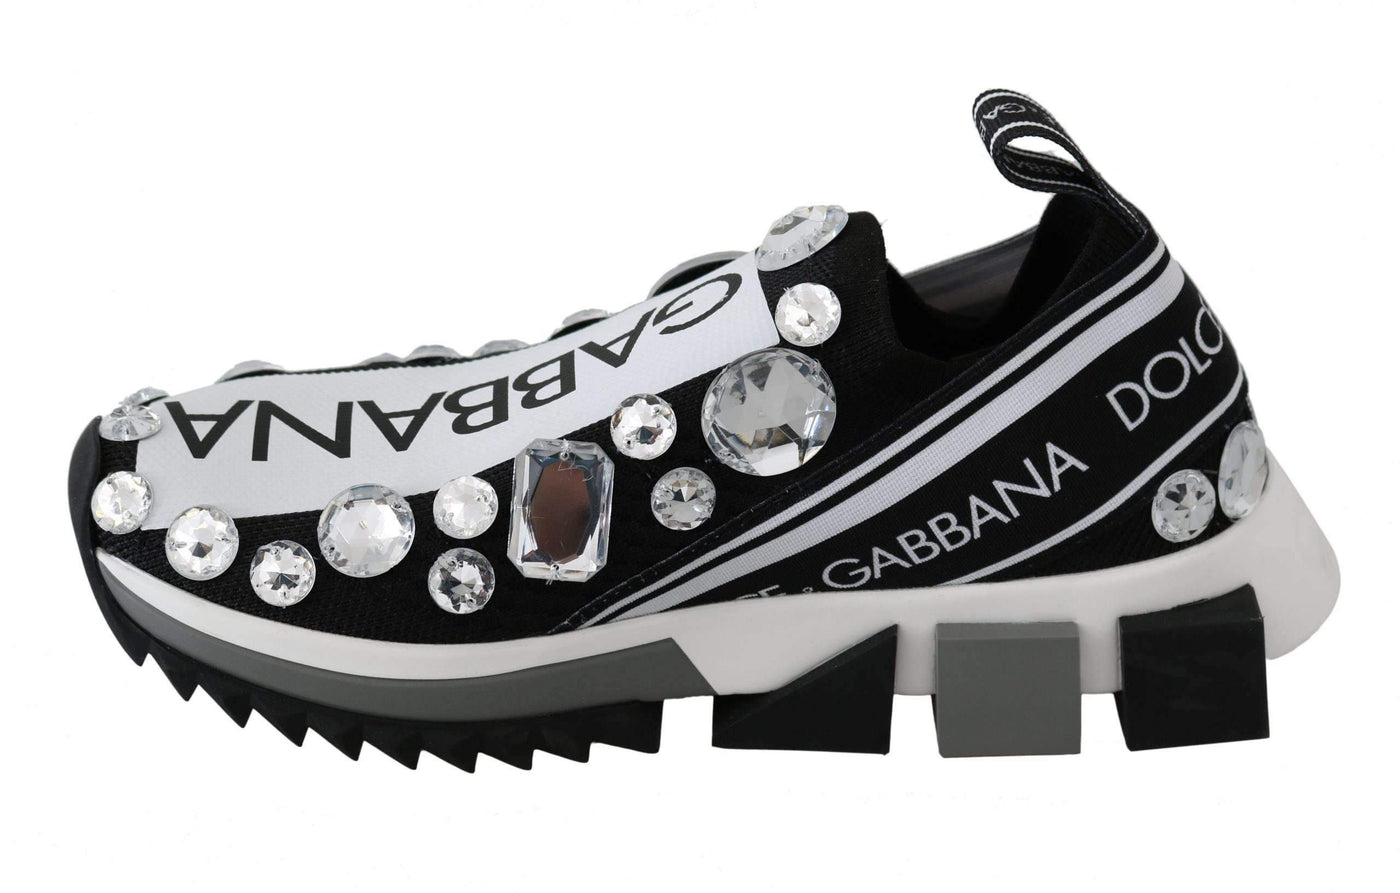 Dolce & Gabbana Black White Crystal Women's Sneakers Shoes #women, Black, Brand_Dolce & Gabbana, Dolce & Gabbana, EU35/US4.5, feed-agegroup-adult, feed-color-black, feed-gender-female, feed-size-US4.5, Gender_Women, Shoes - New Arrivals, Sneakers - Women - Shoes at SEYMAYKA